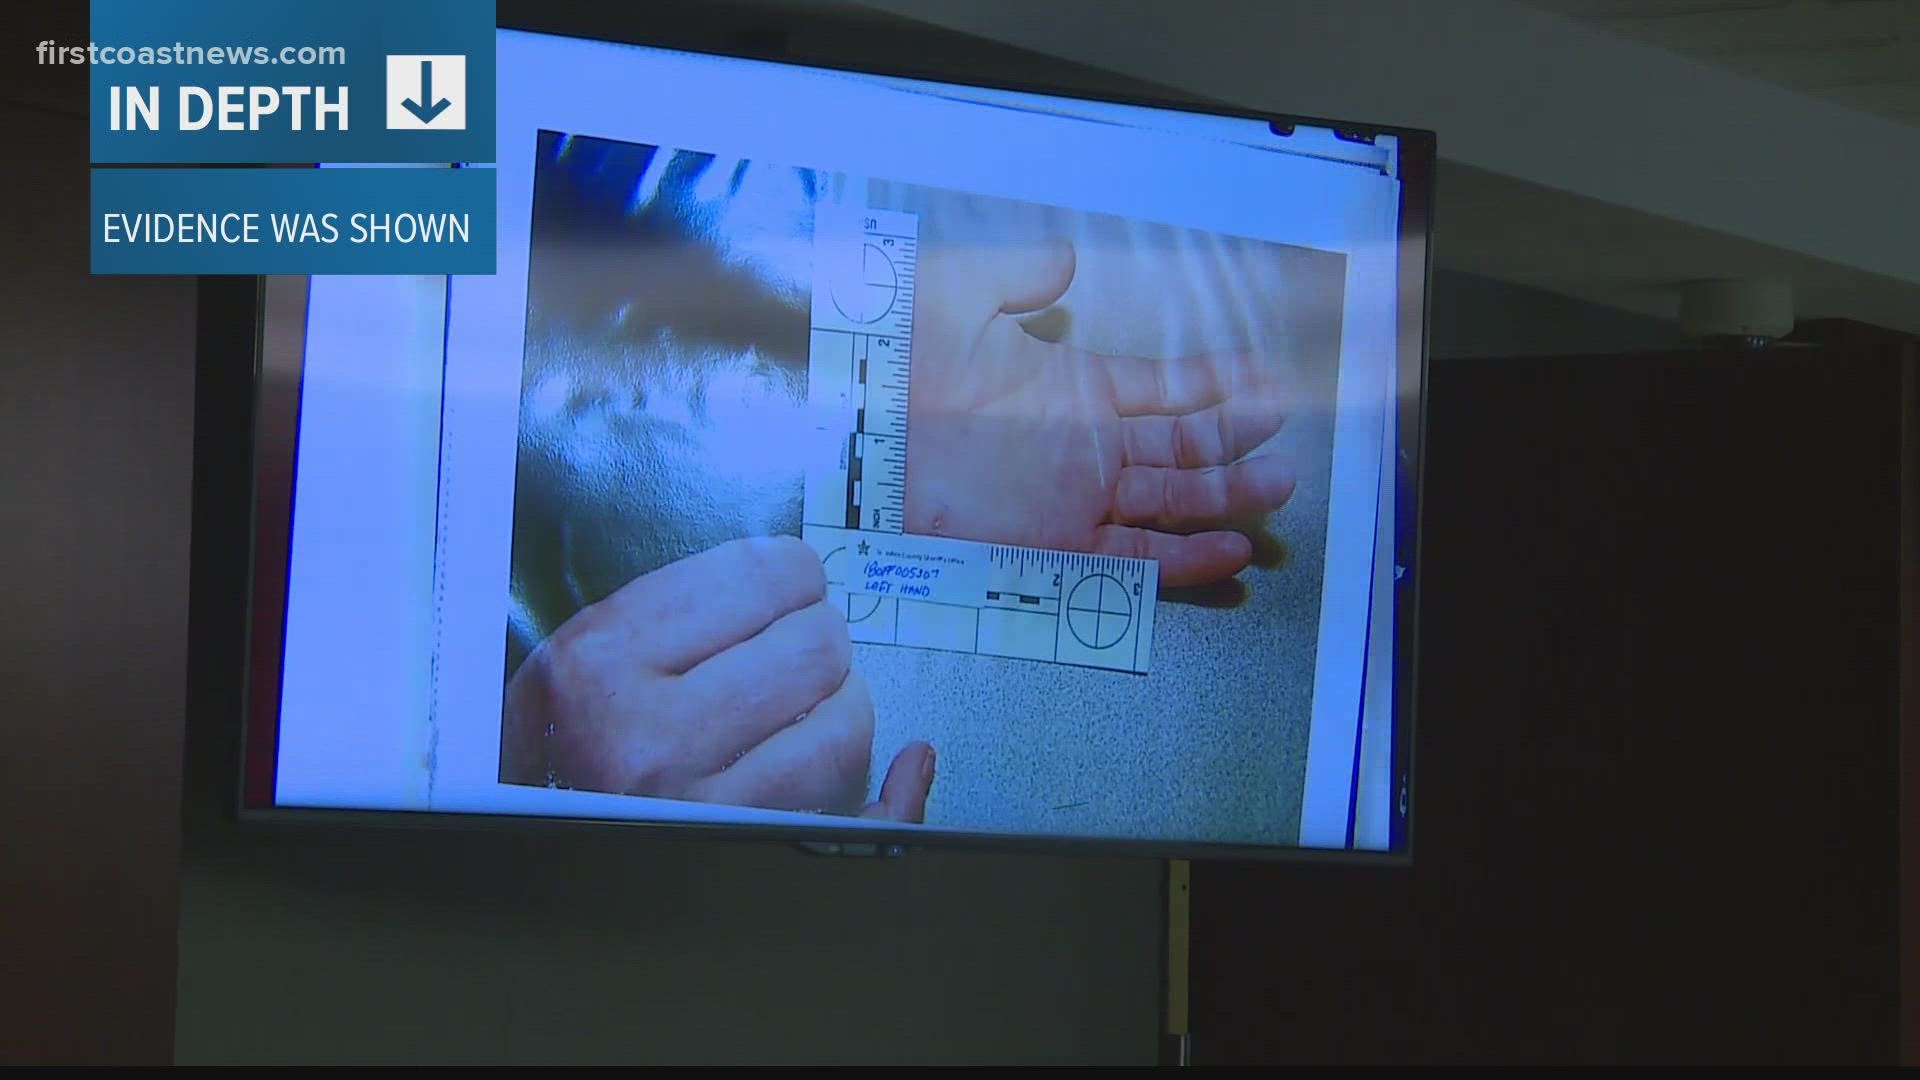 Among the evidence presented to the jury were pictures of wounds Kessler received.